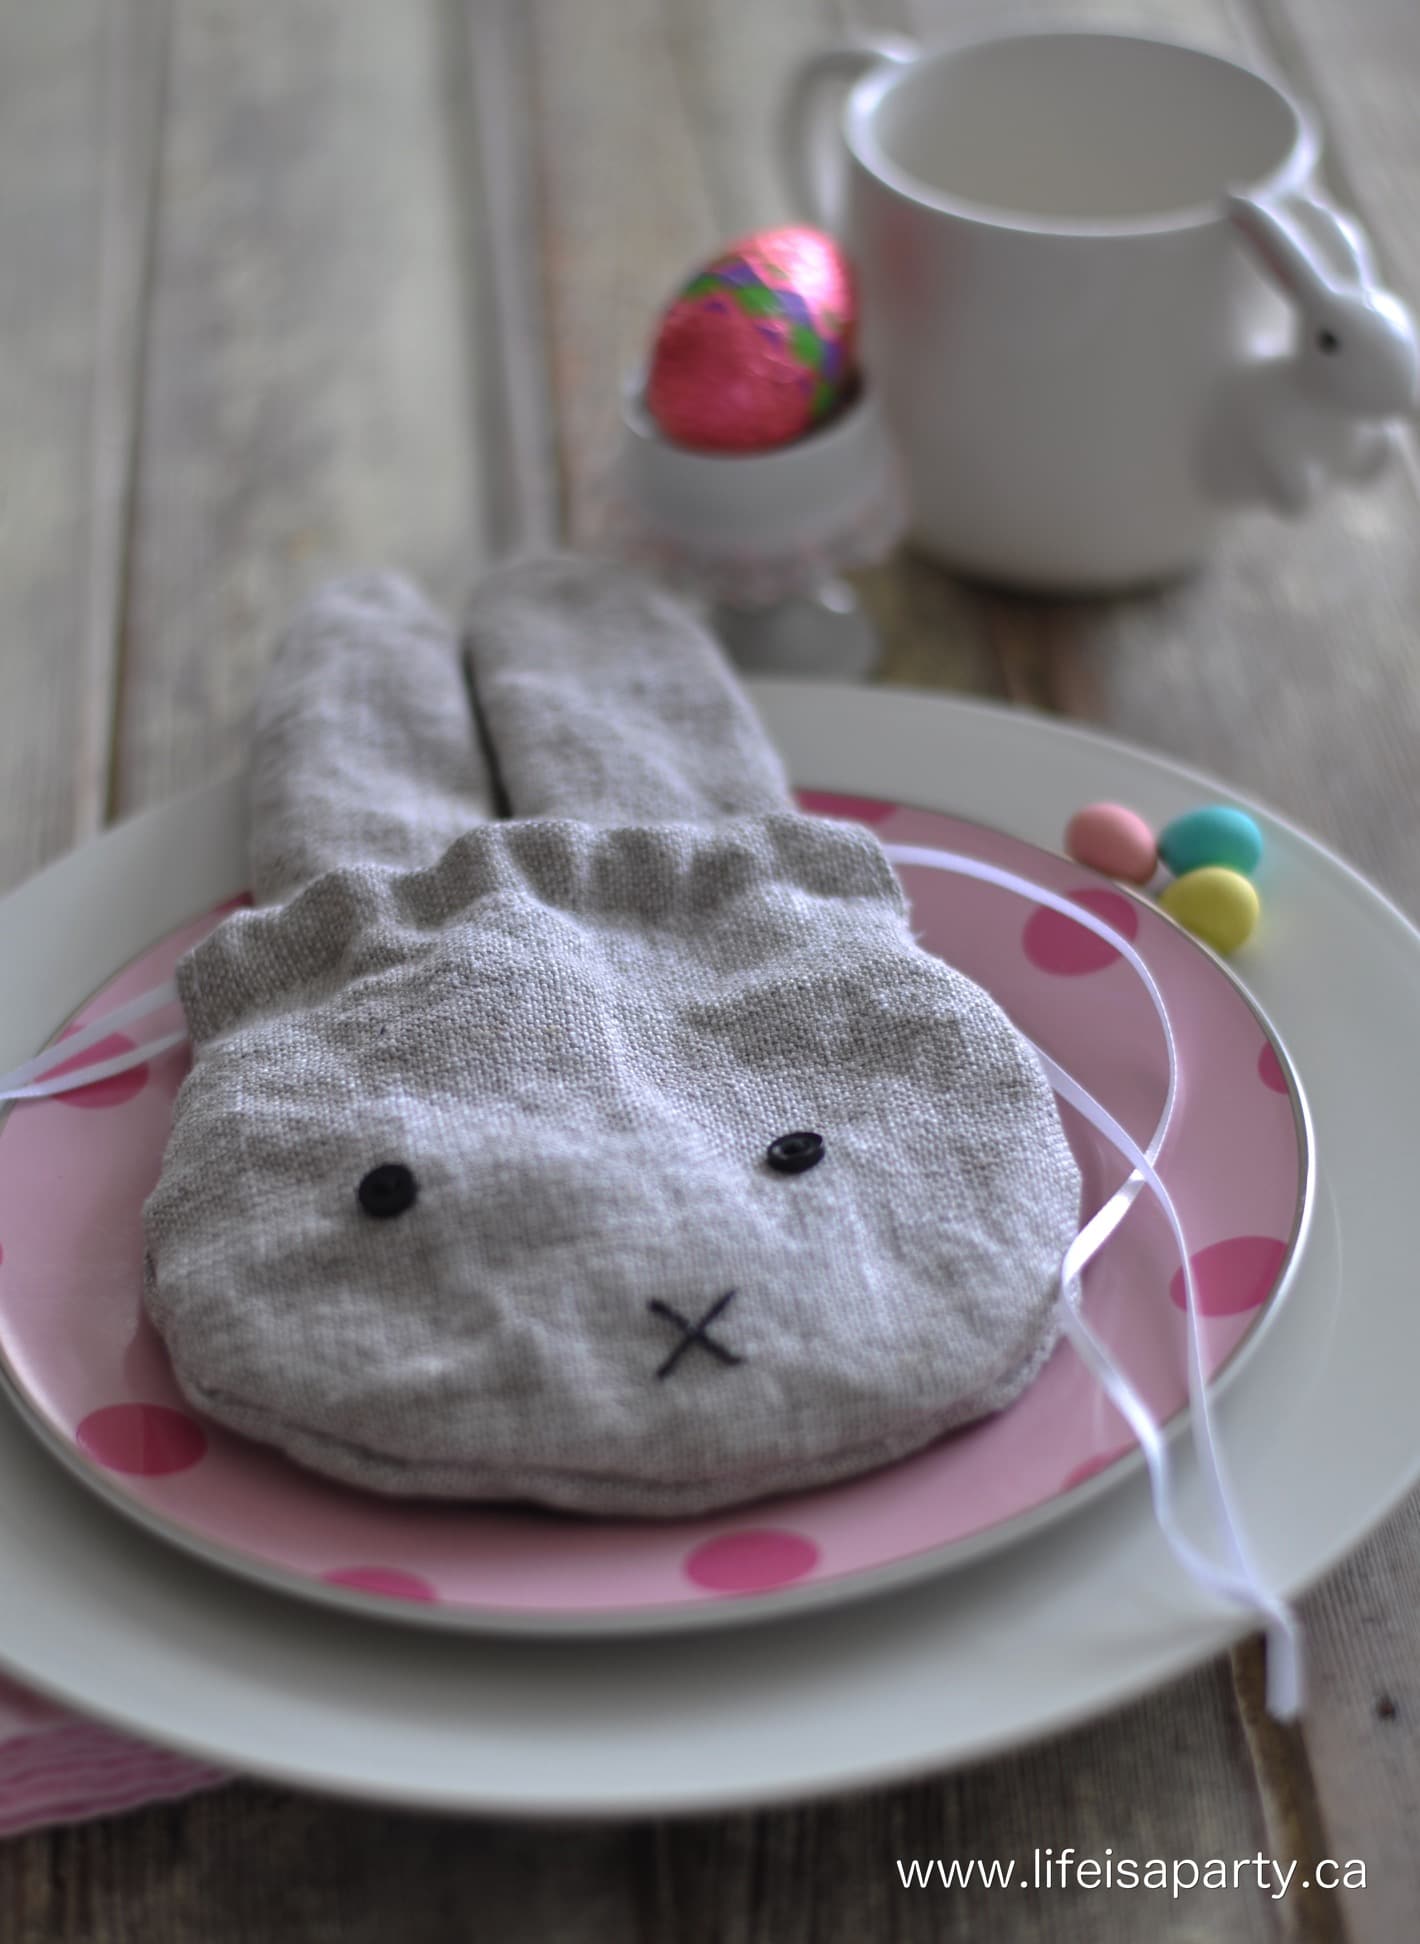 Linen Easter Bunny Drawstring Treat Bag: Quick to sew, includes a free pattern and tutorial on how to make it.